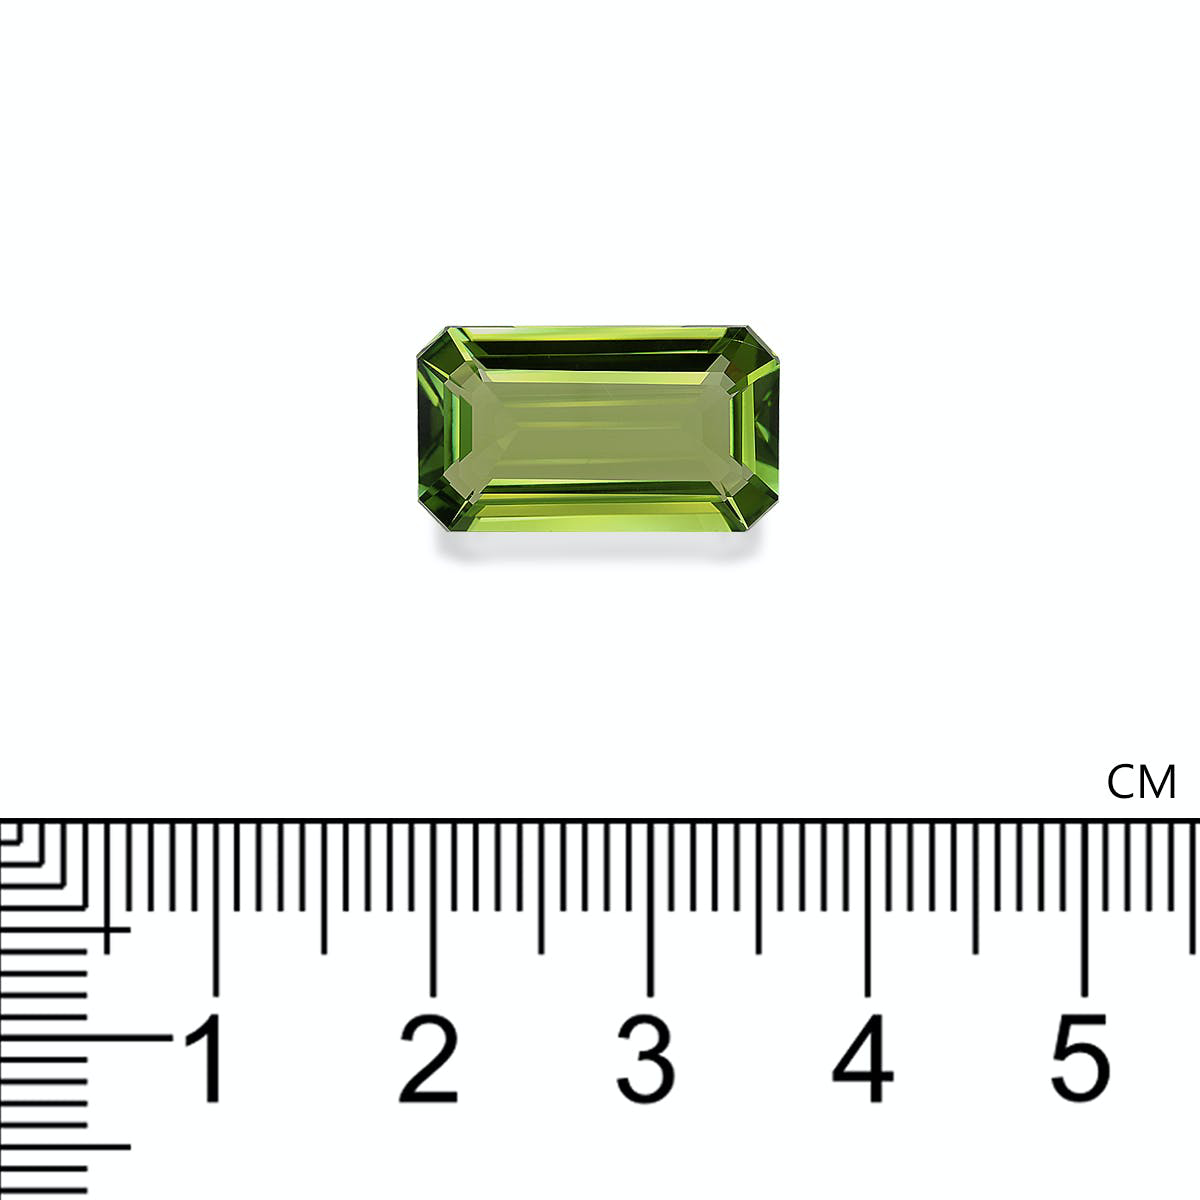 Picture of Lime Green Tourmaline 7.55ct (TG1621)